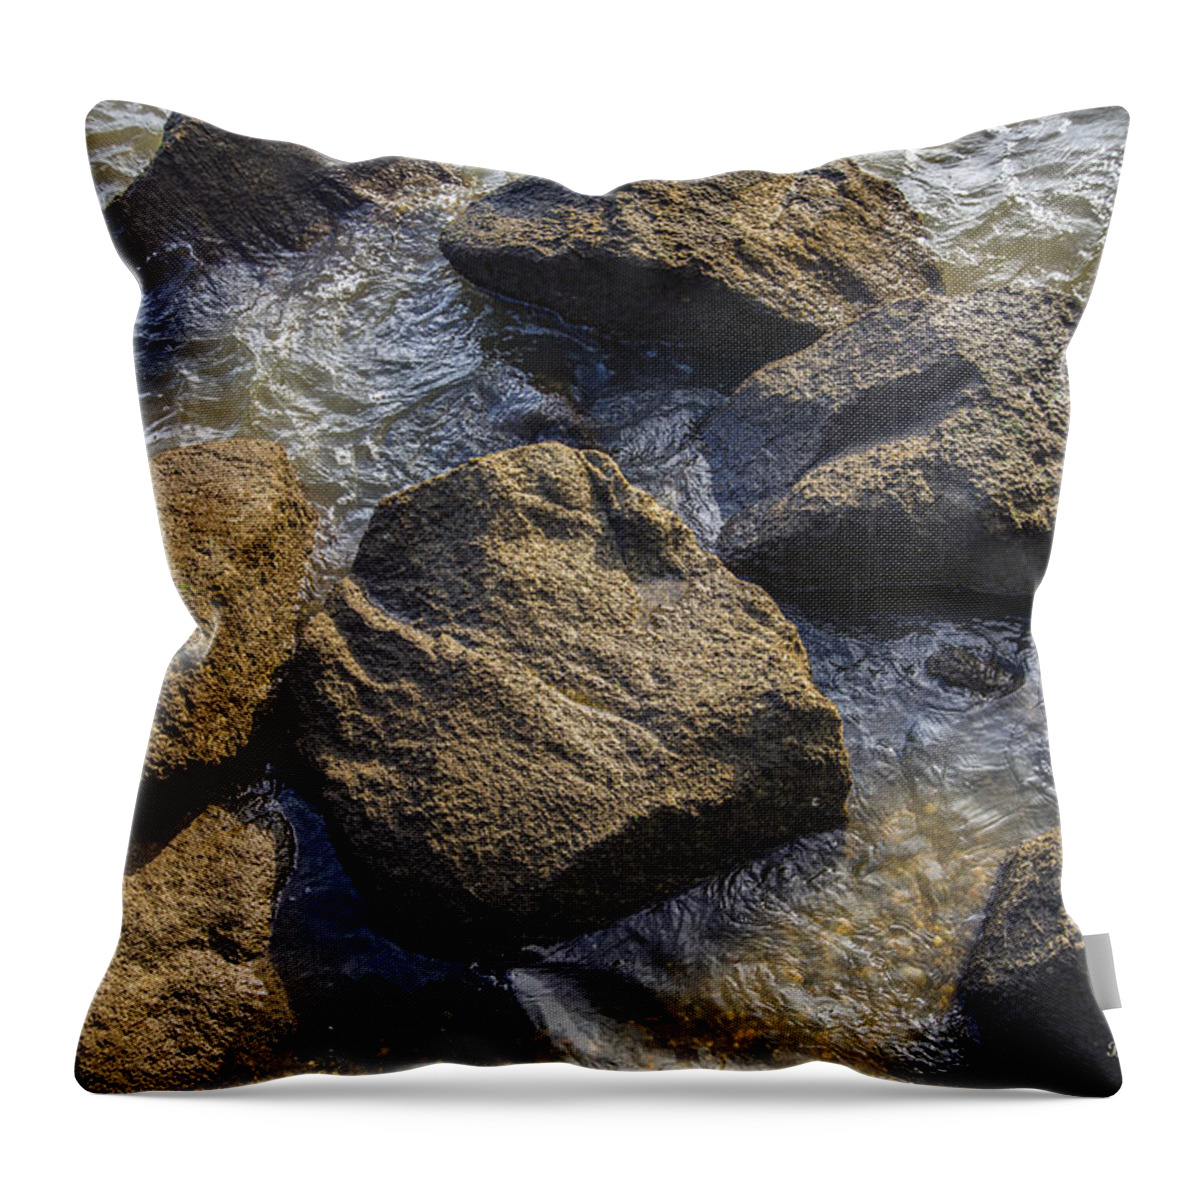 2d Throw Pillow featuring the photograph I Am A Rock by Brian Wallace